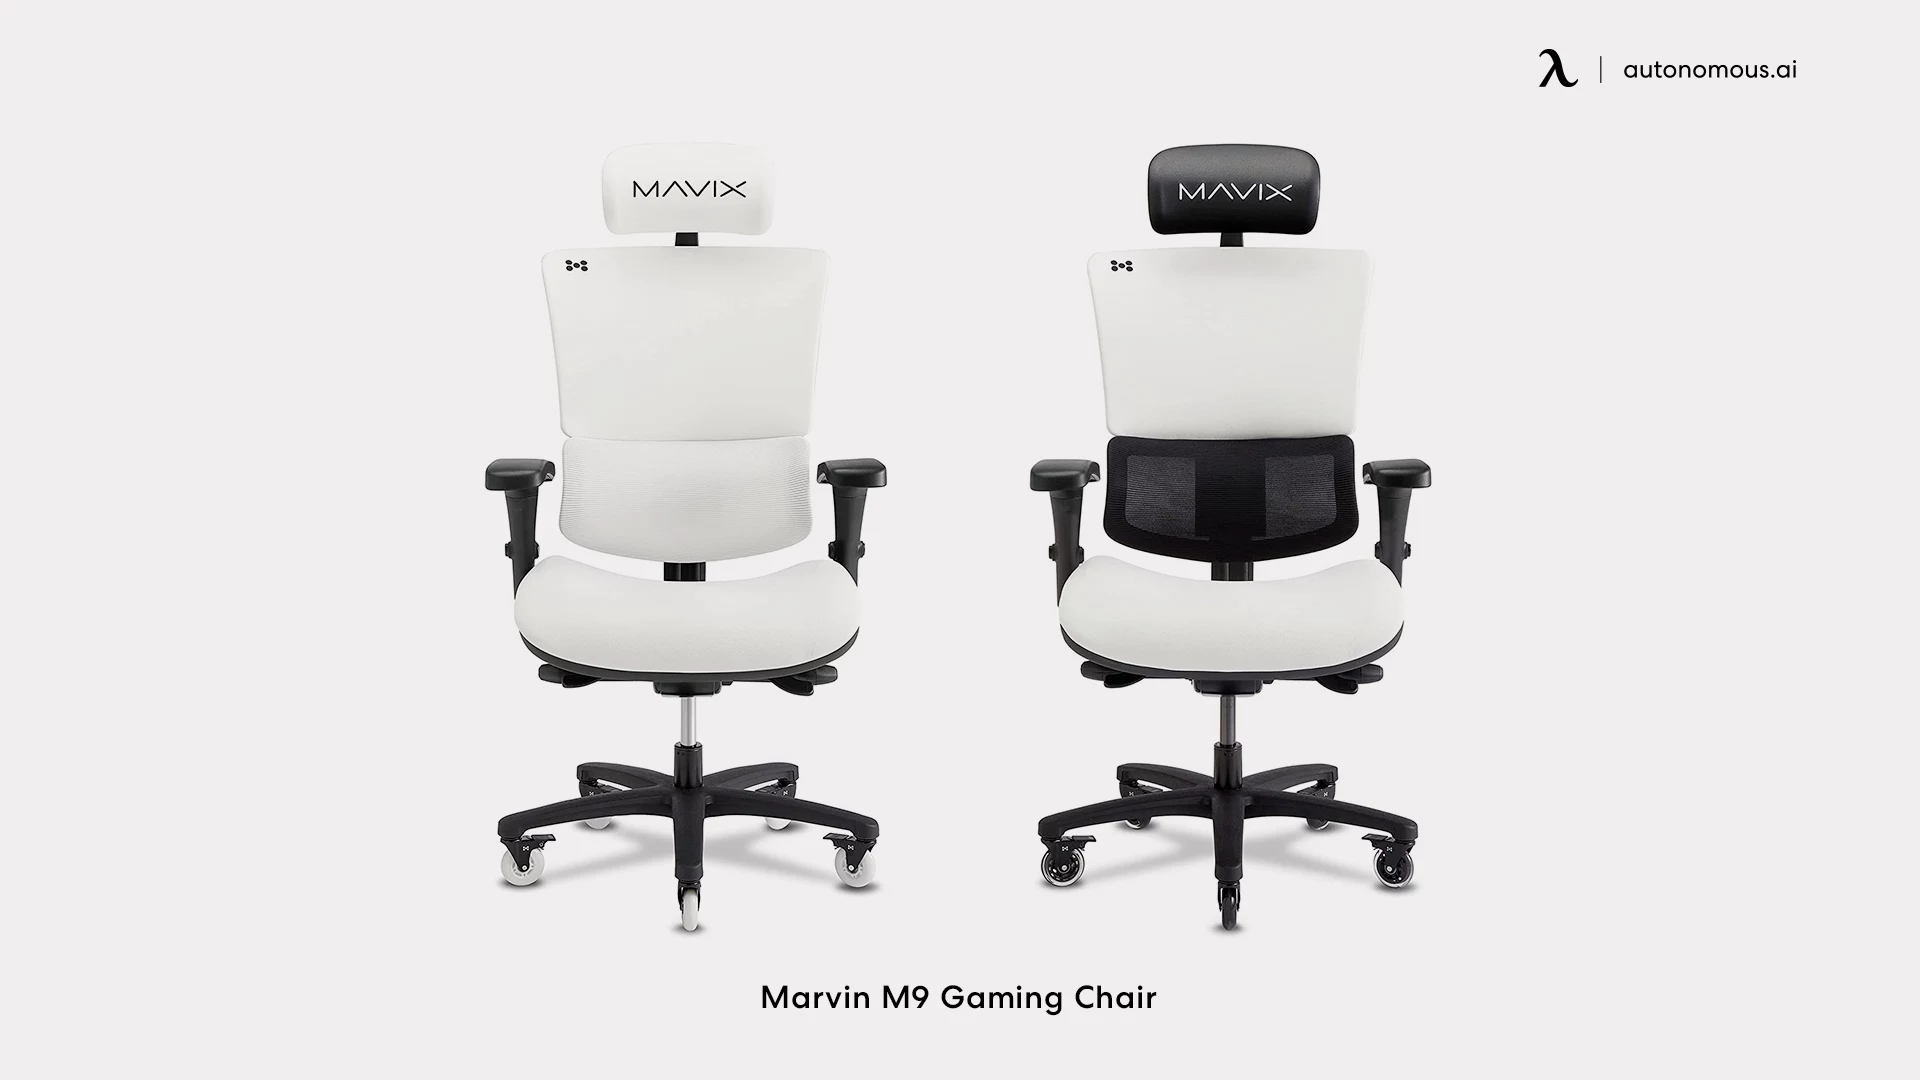 Marvin M9 Gaming Chair